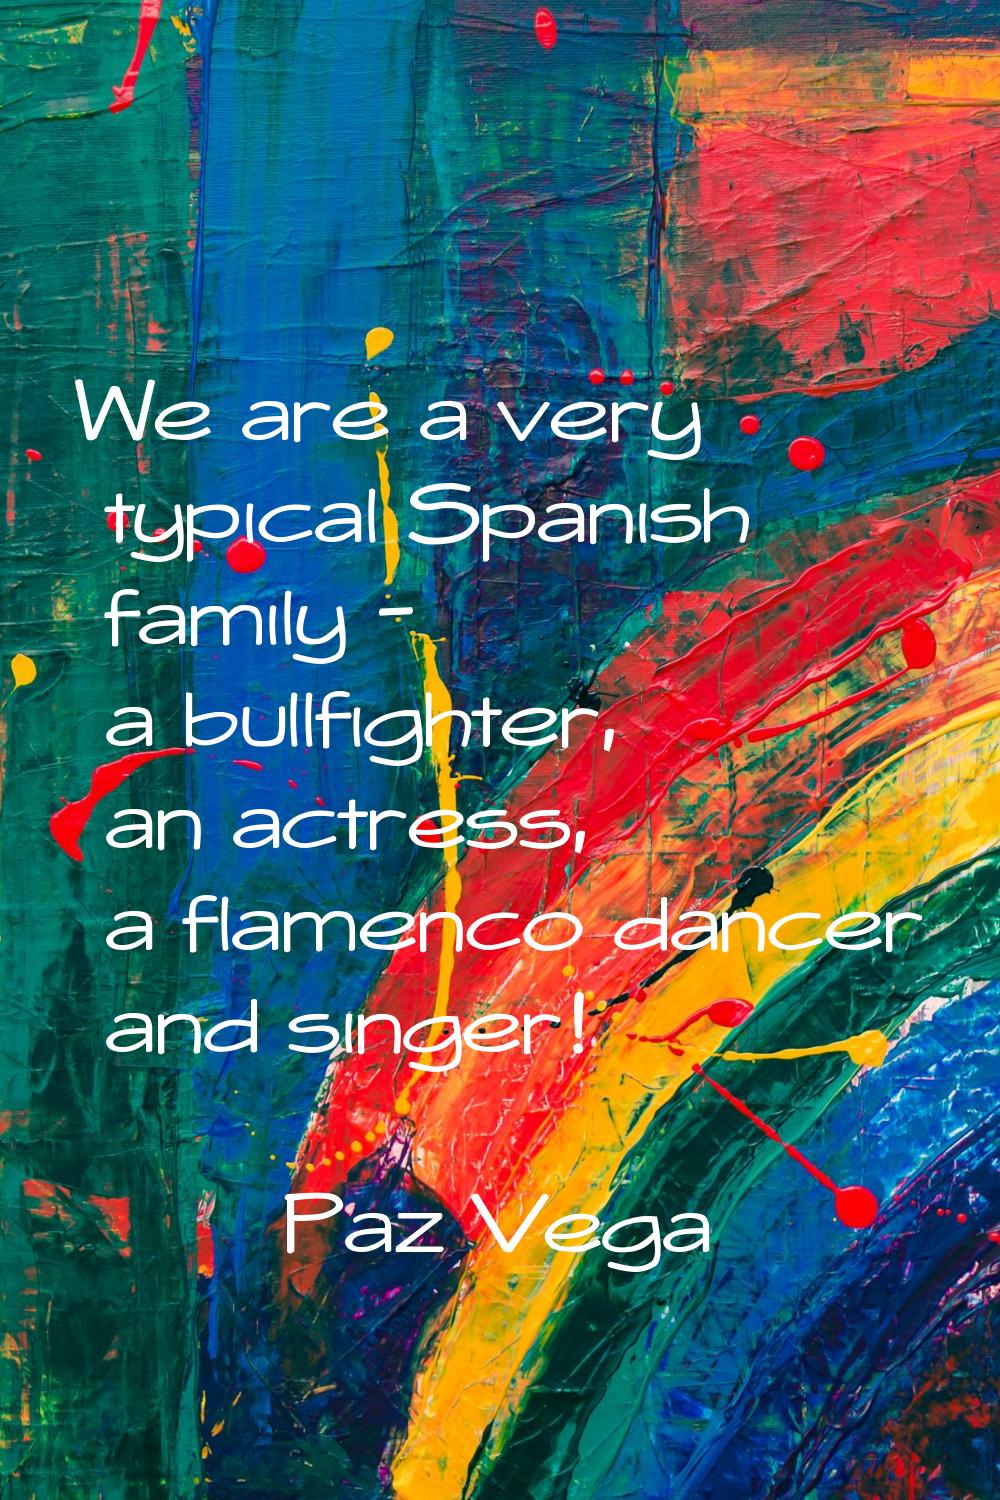 We are a very typical Spanish family - a bullfighter, an actress, a flamenco dancer and singer!